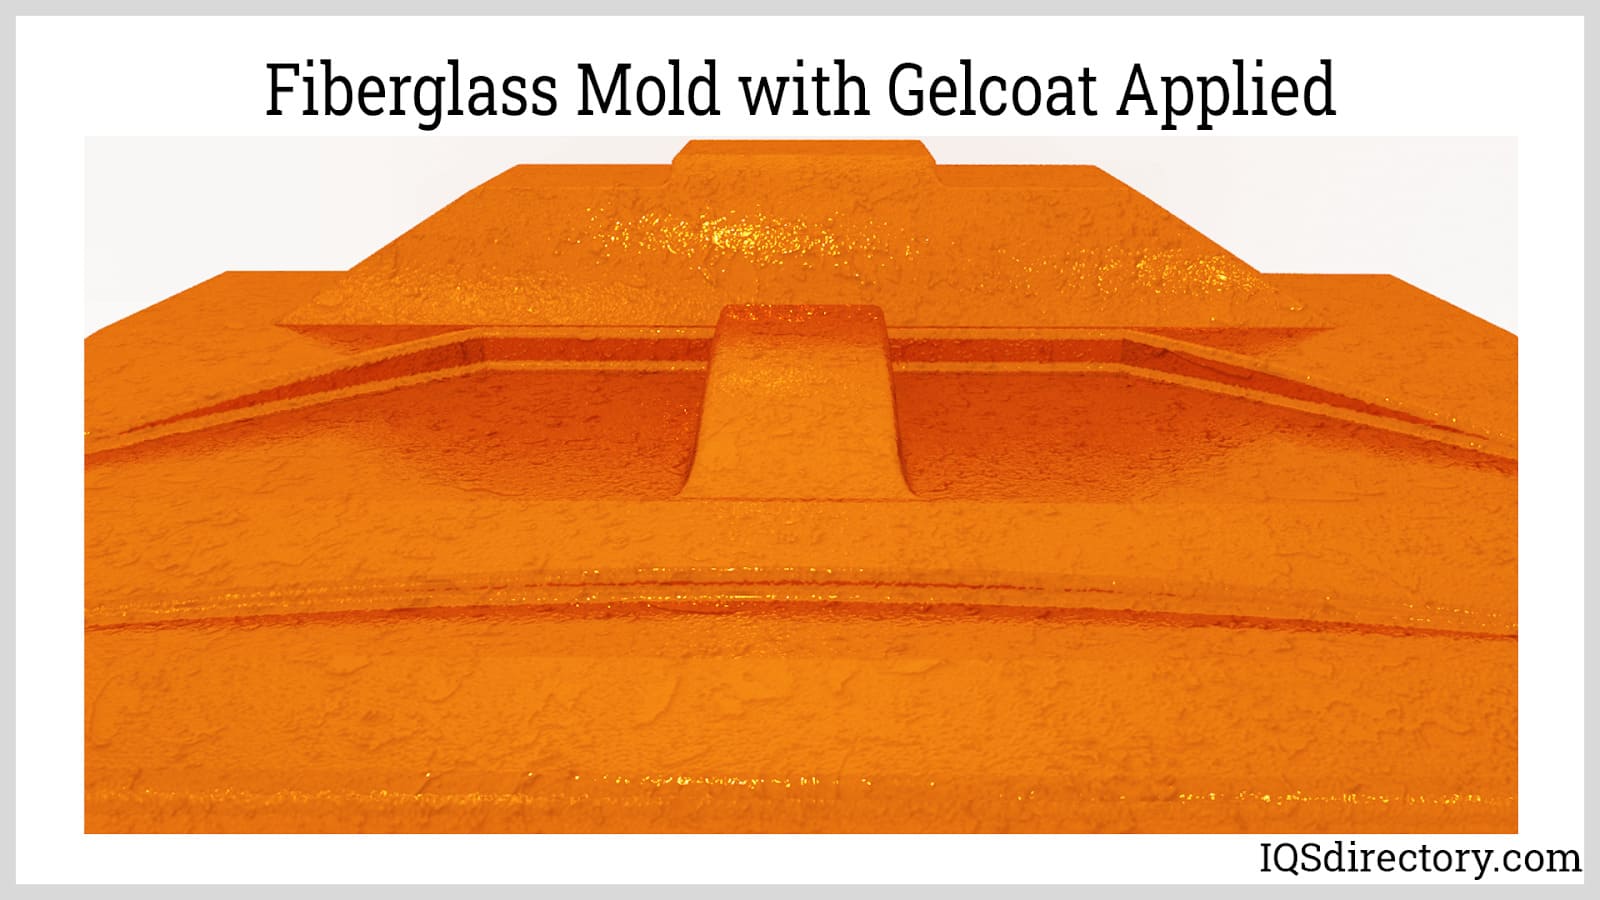 Fiberglass Mold with Gelcoat Applied